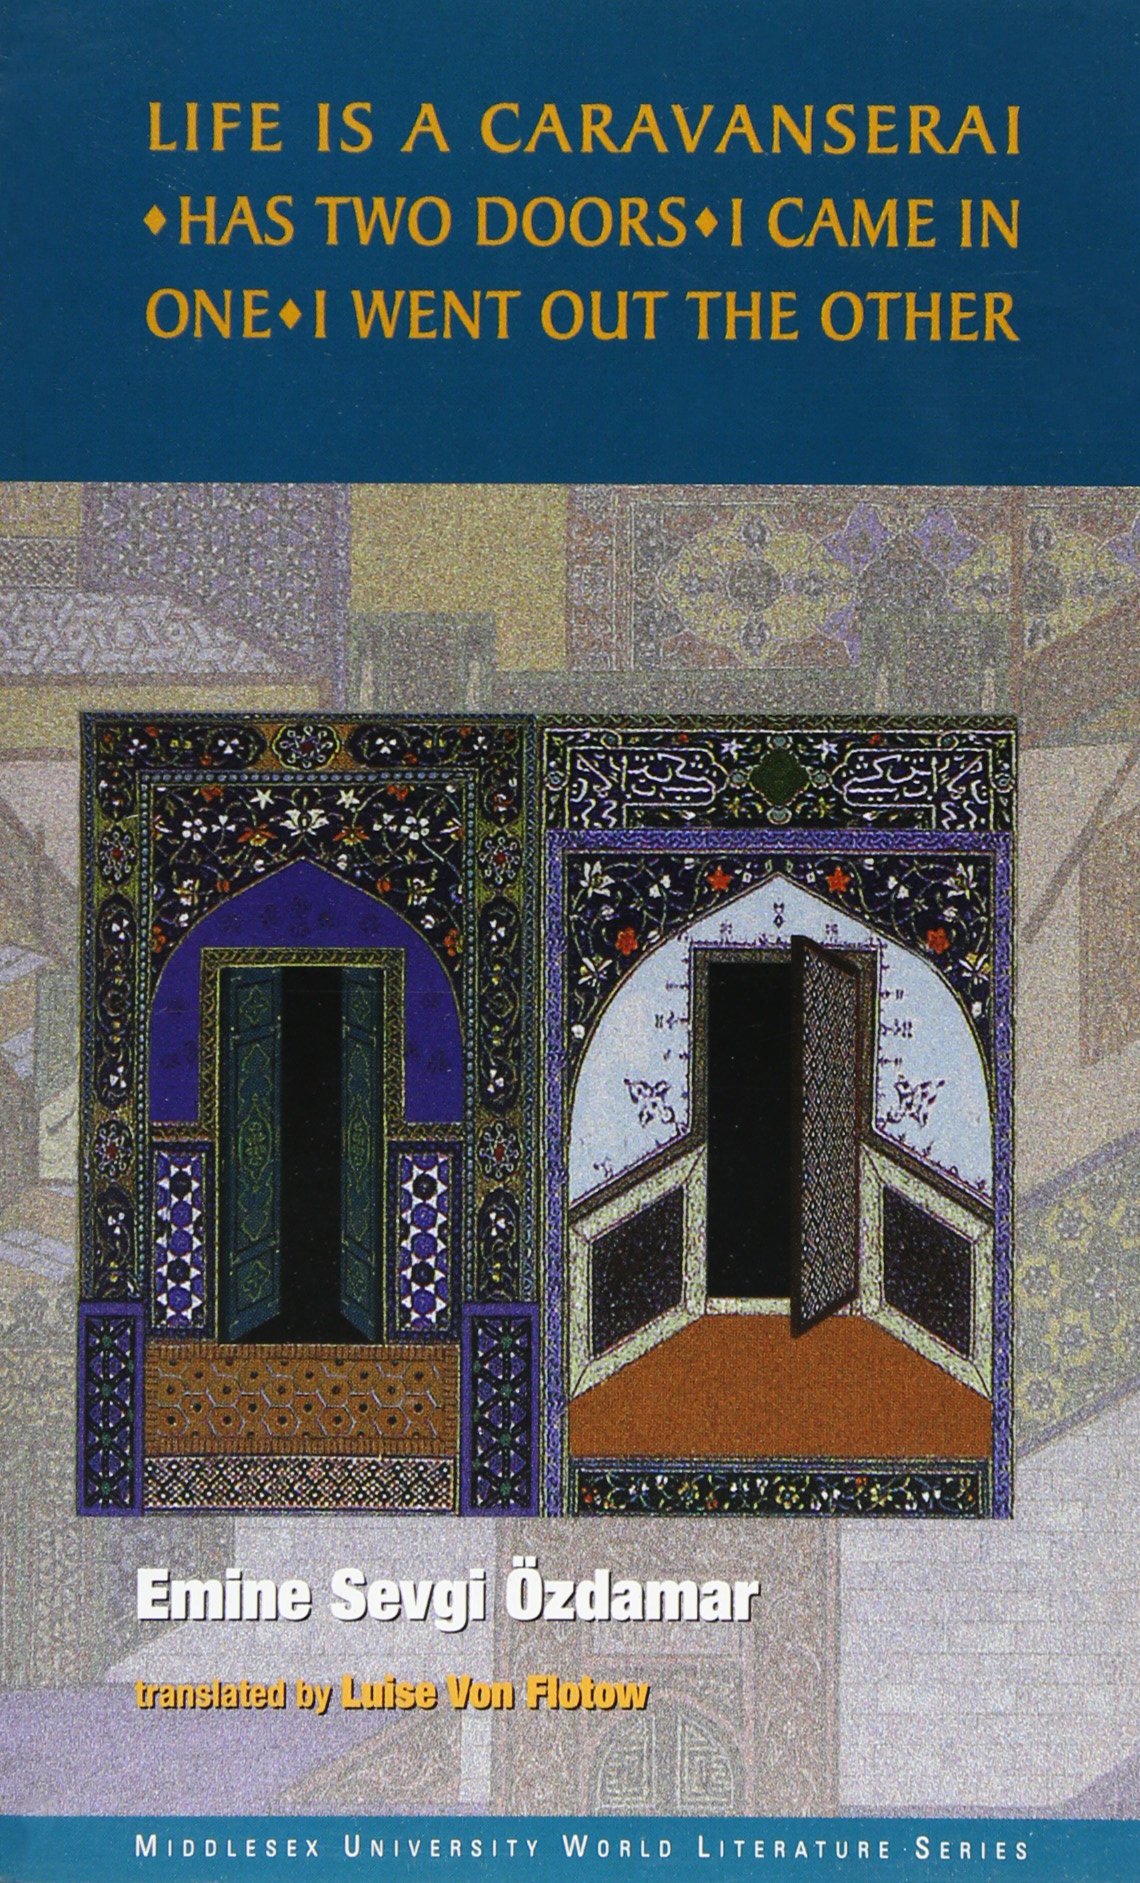 Cover of Ozdamarʹs "Life is a Caravanserai" (published by Middlesex University Press)